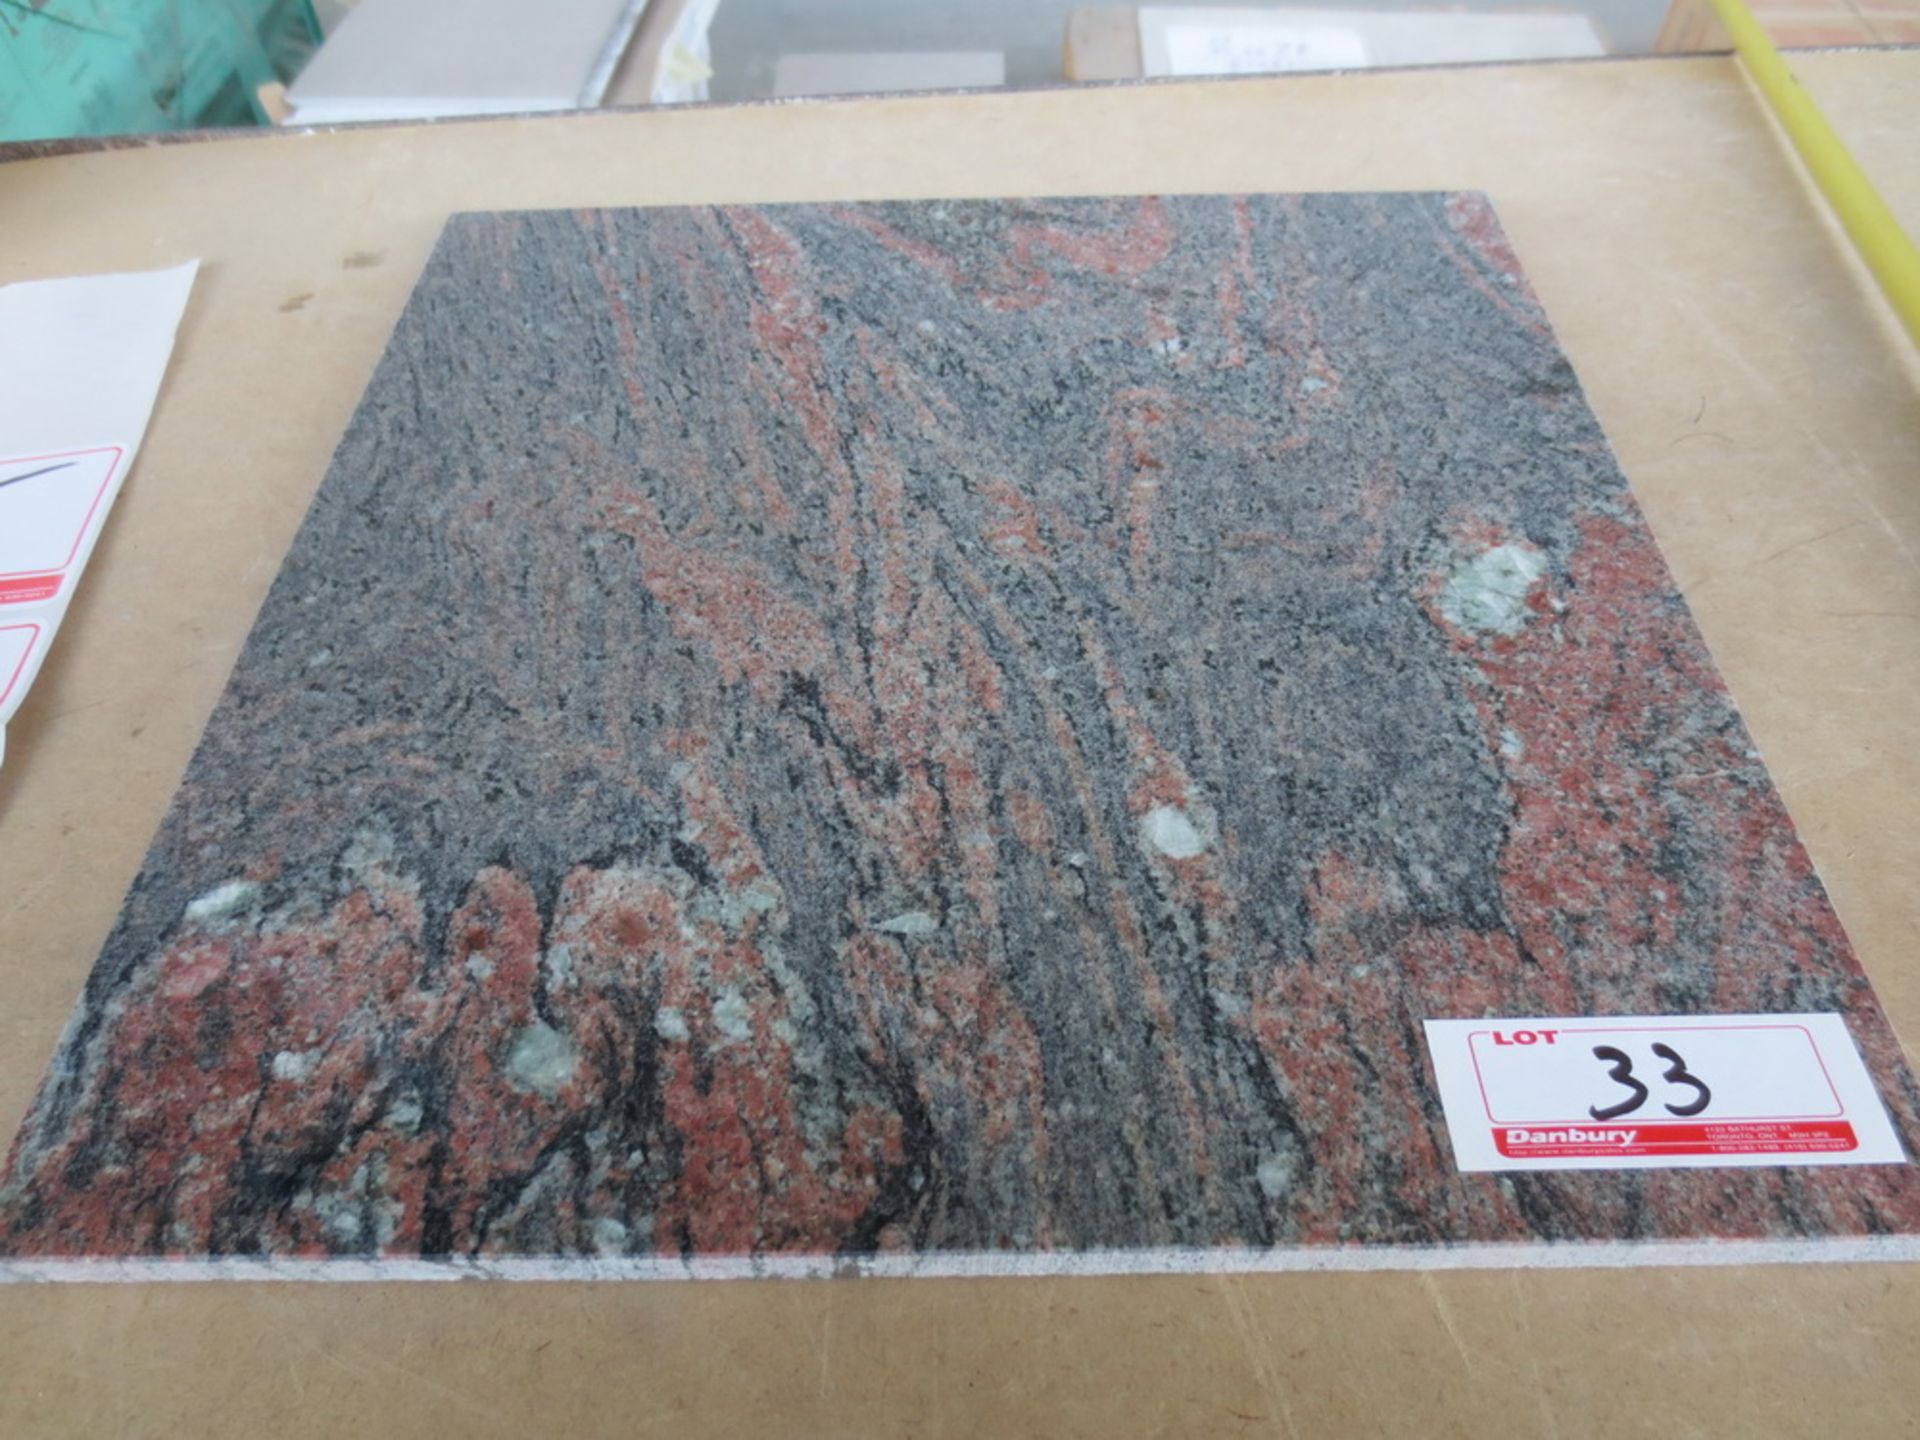 490 - SQ. FT. TROPICAL RED APPROX 12X12 GRANITE TILE 49 BOXES